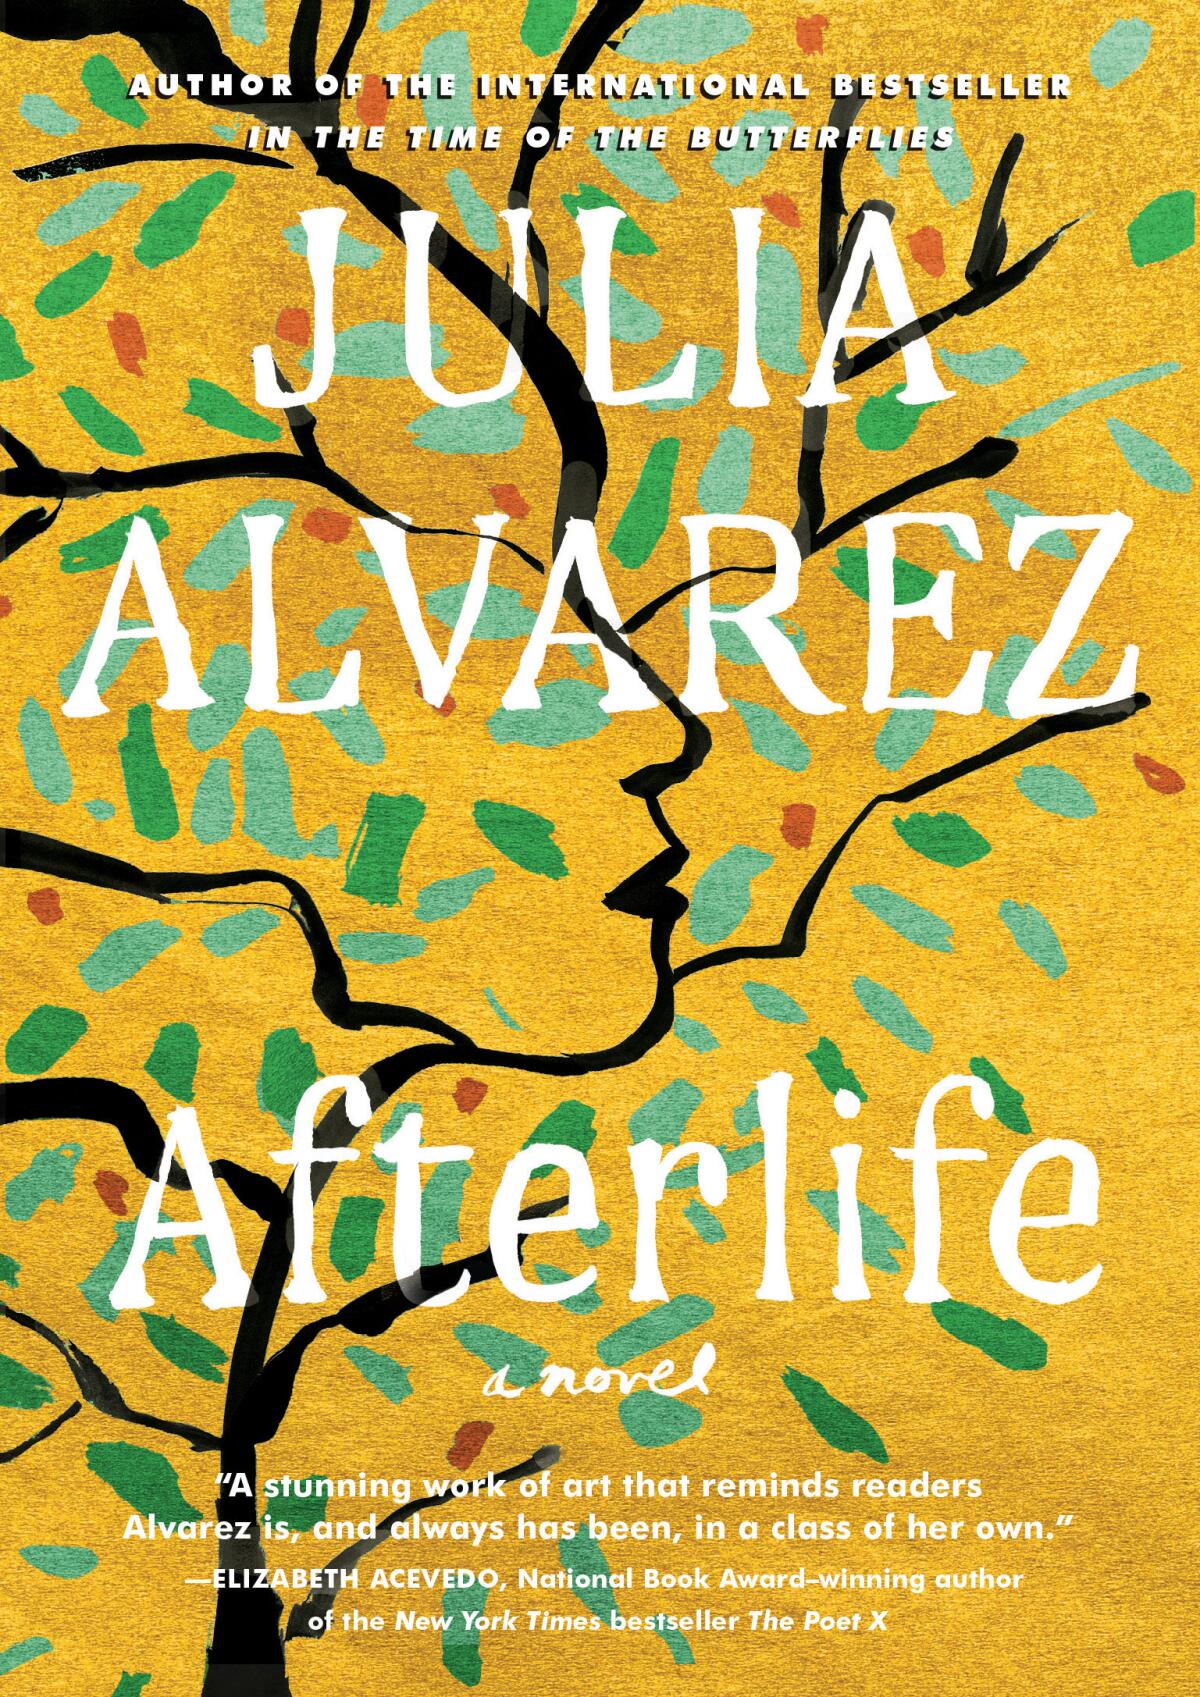 Book Review - Afterlife